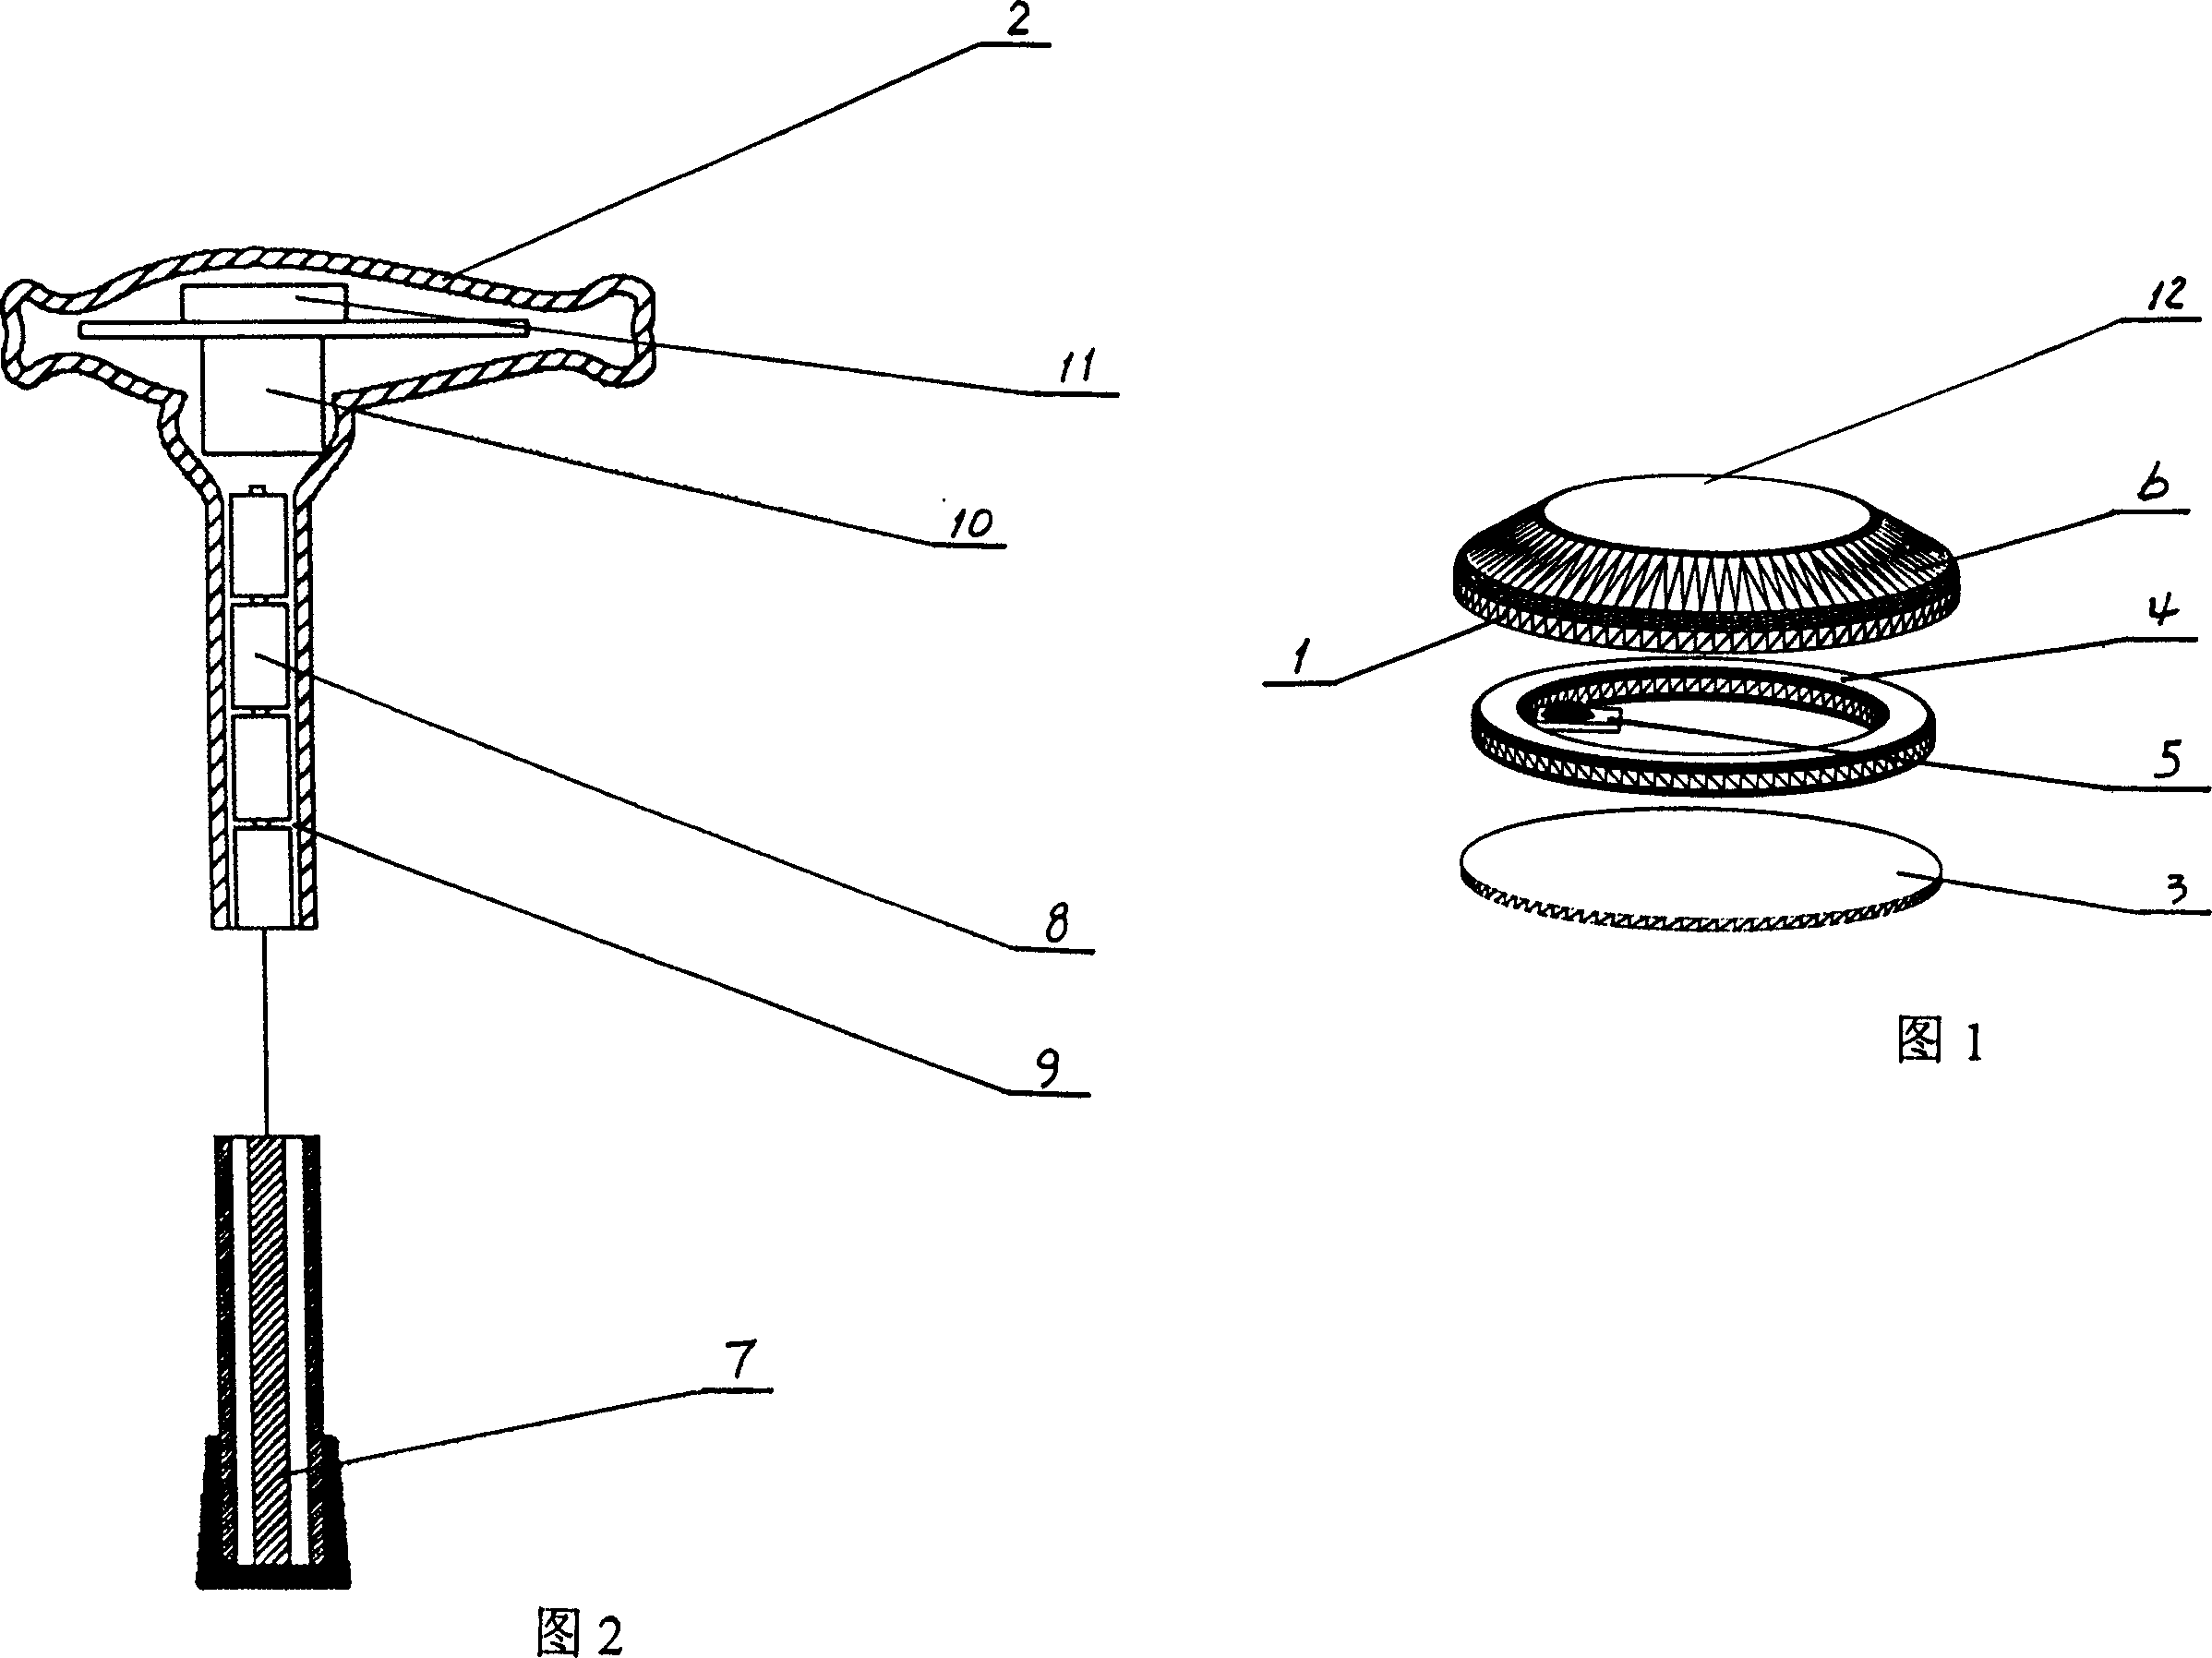 Blind person way guiding device with electronic marks